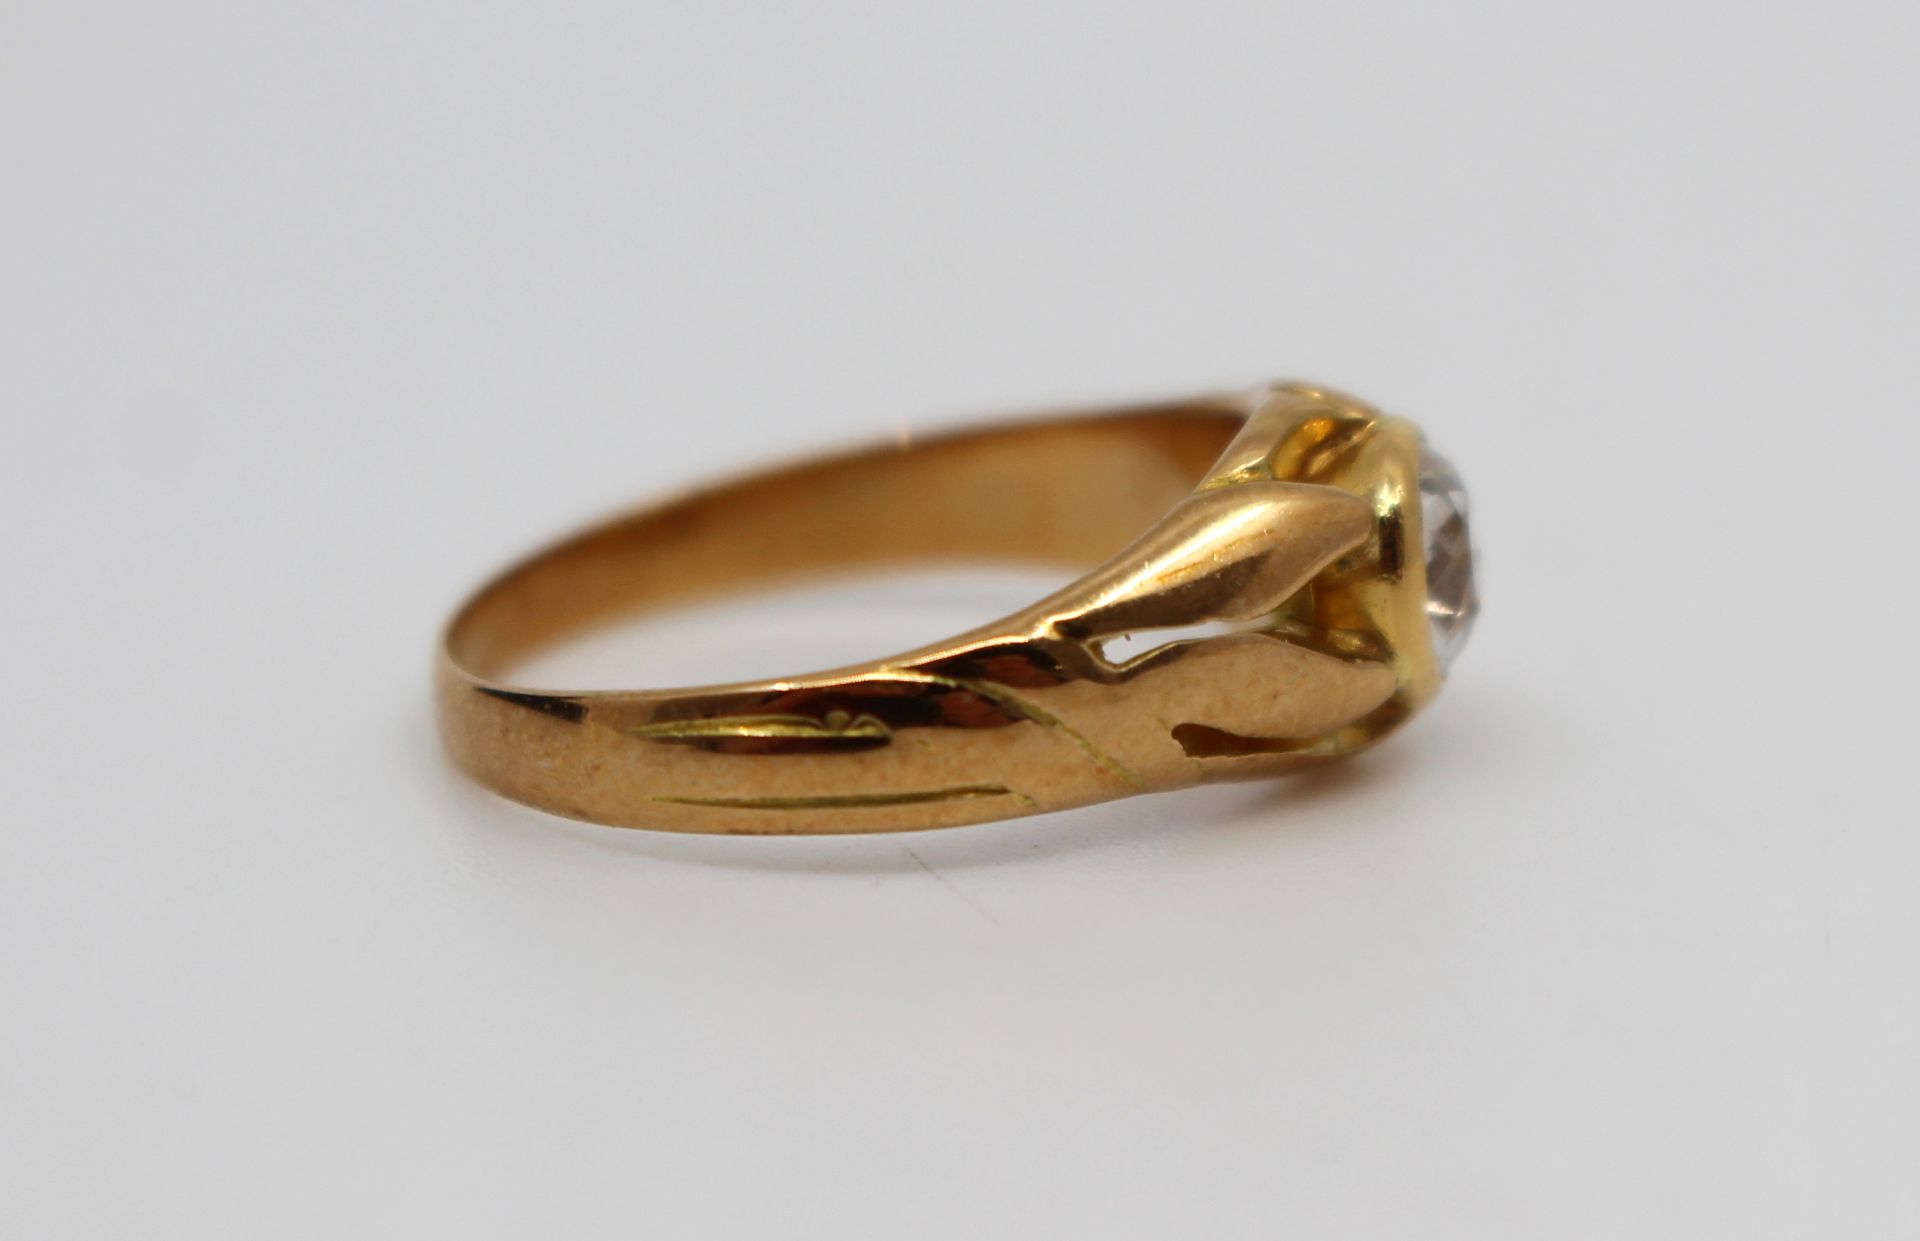 Early 20th c. 15 ct Rose Gold 0.52 carat Diamond Ring - Image 5 of 8